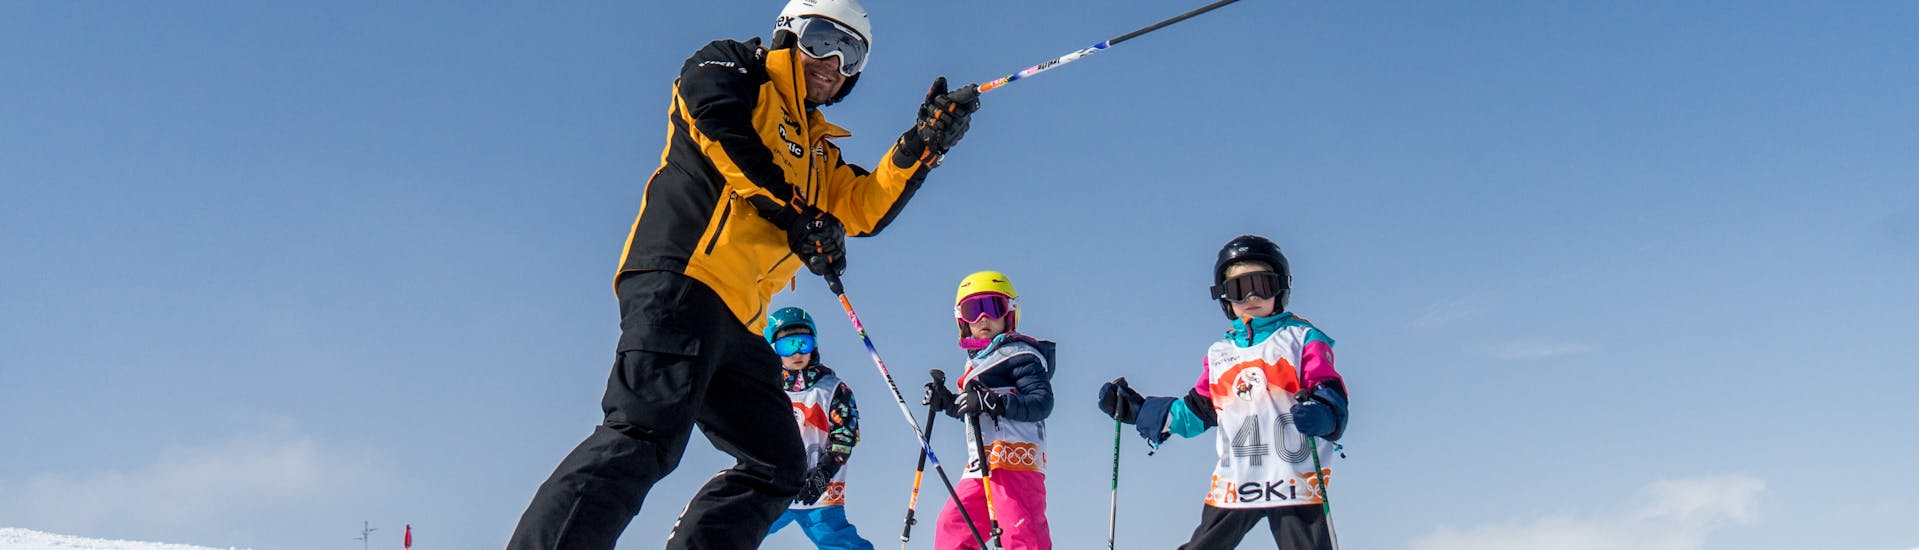 A ski instructor showing three kids the way on the slope during Private Skiing Lessons for Kids of All Levels with HSKi Zakopane.